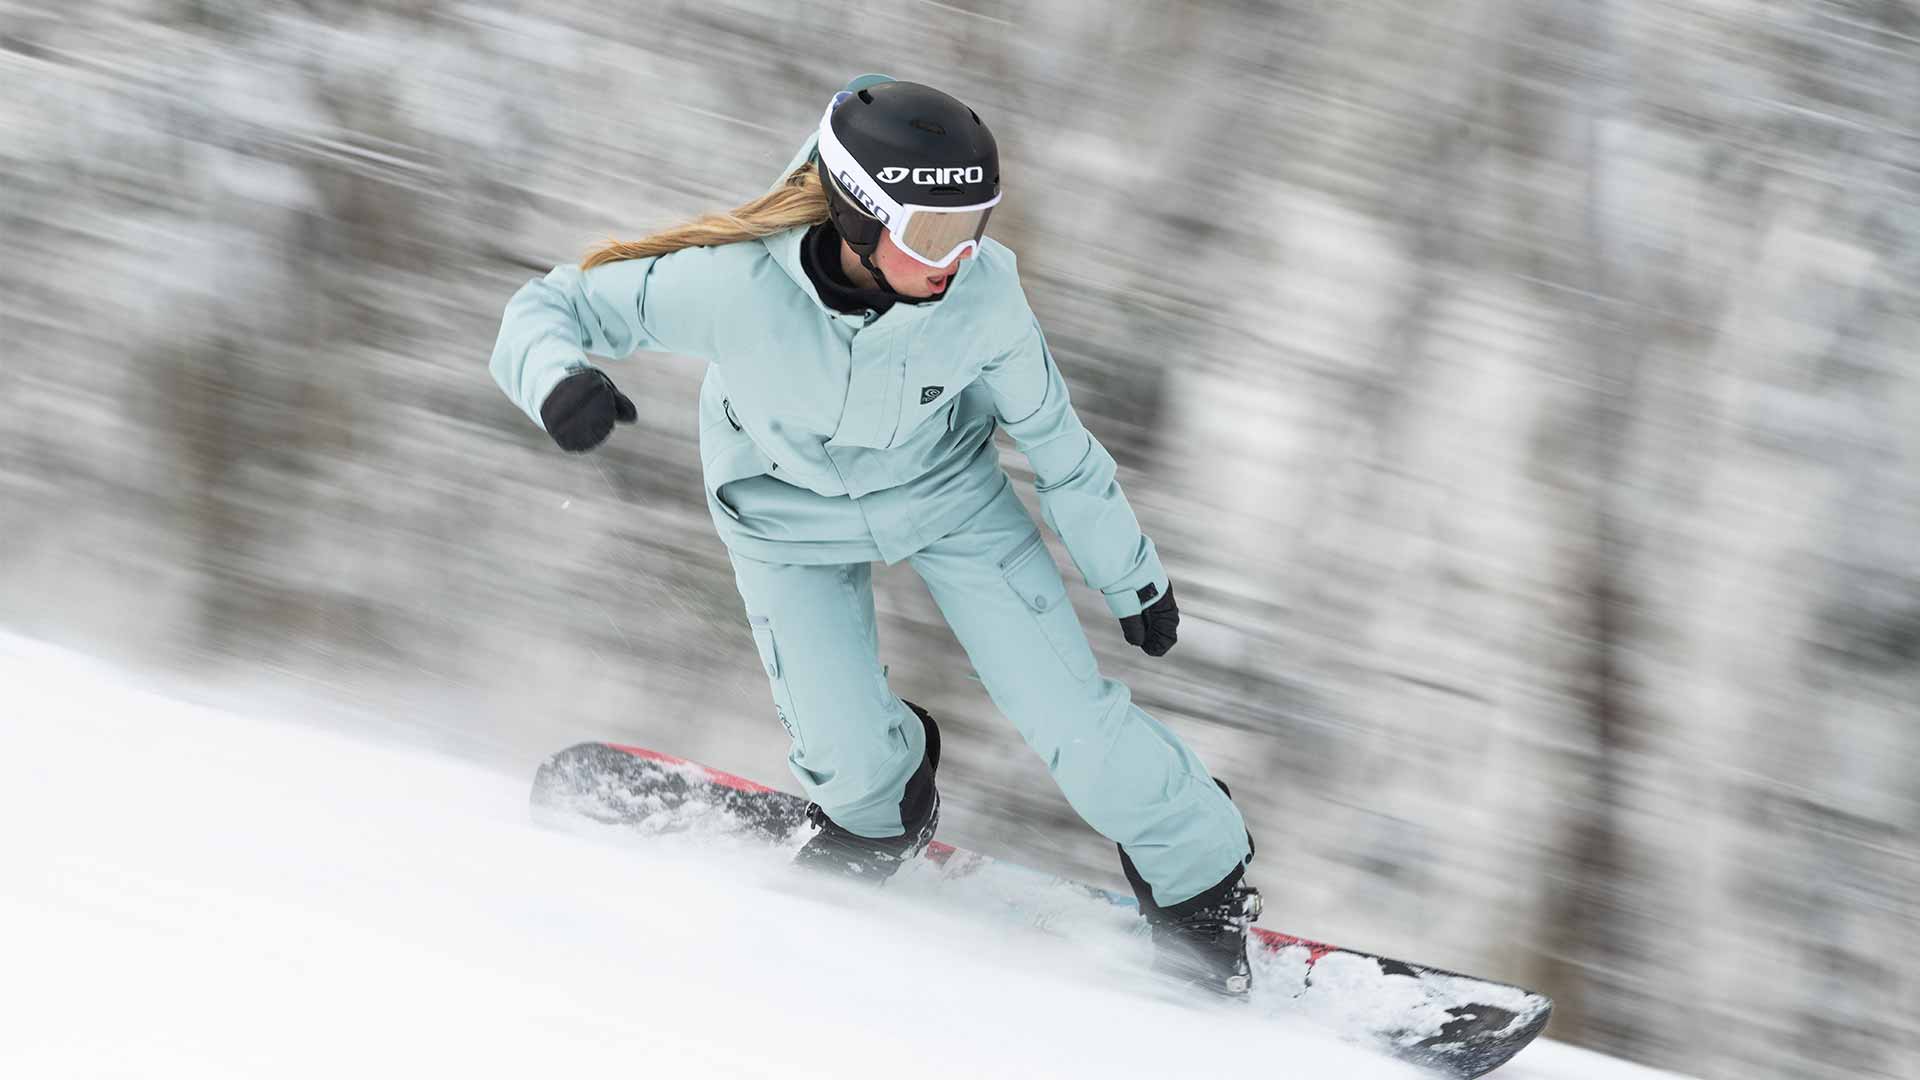 Motion shot of a Rip Curl Snowboarder in France